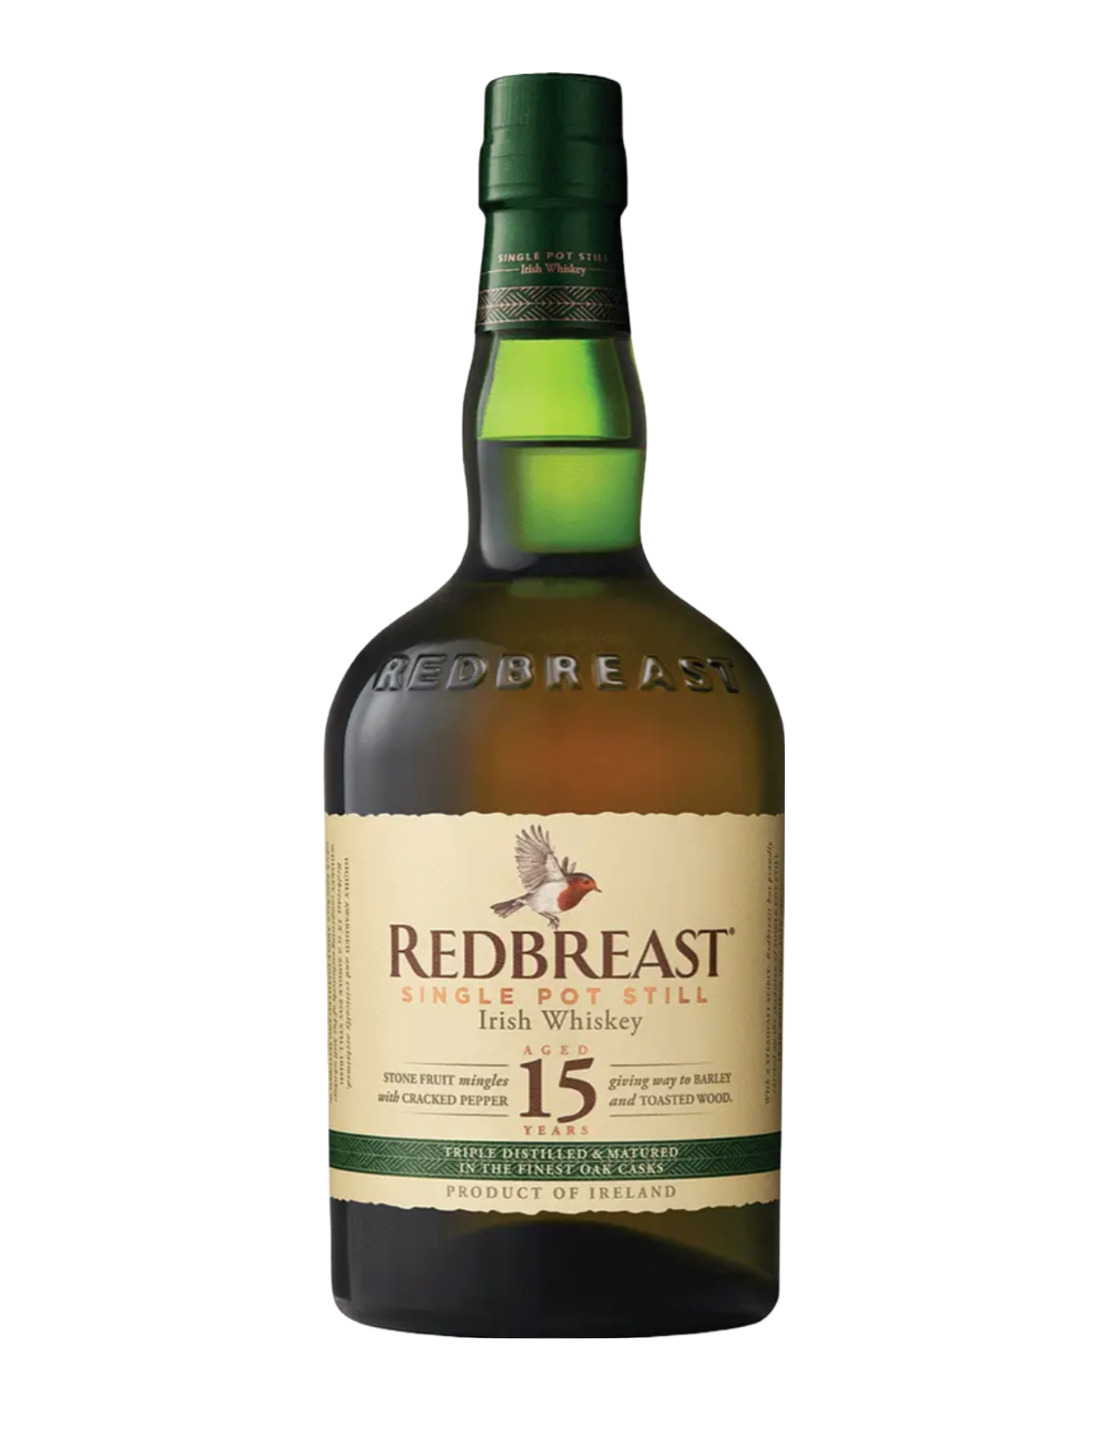 An elegant bottle of Redbreast 15 Year Old Irish Whiskey in front of a plain white background